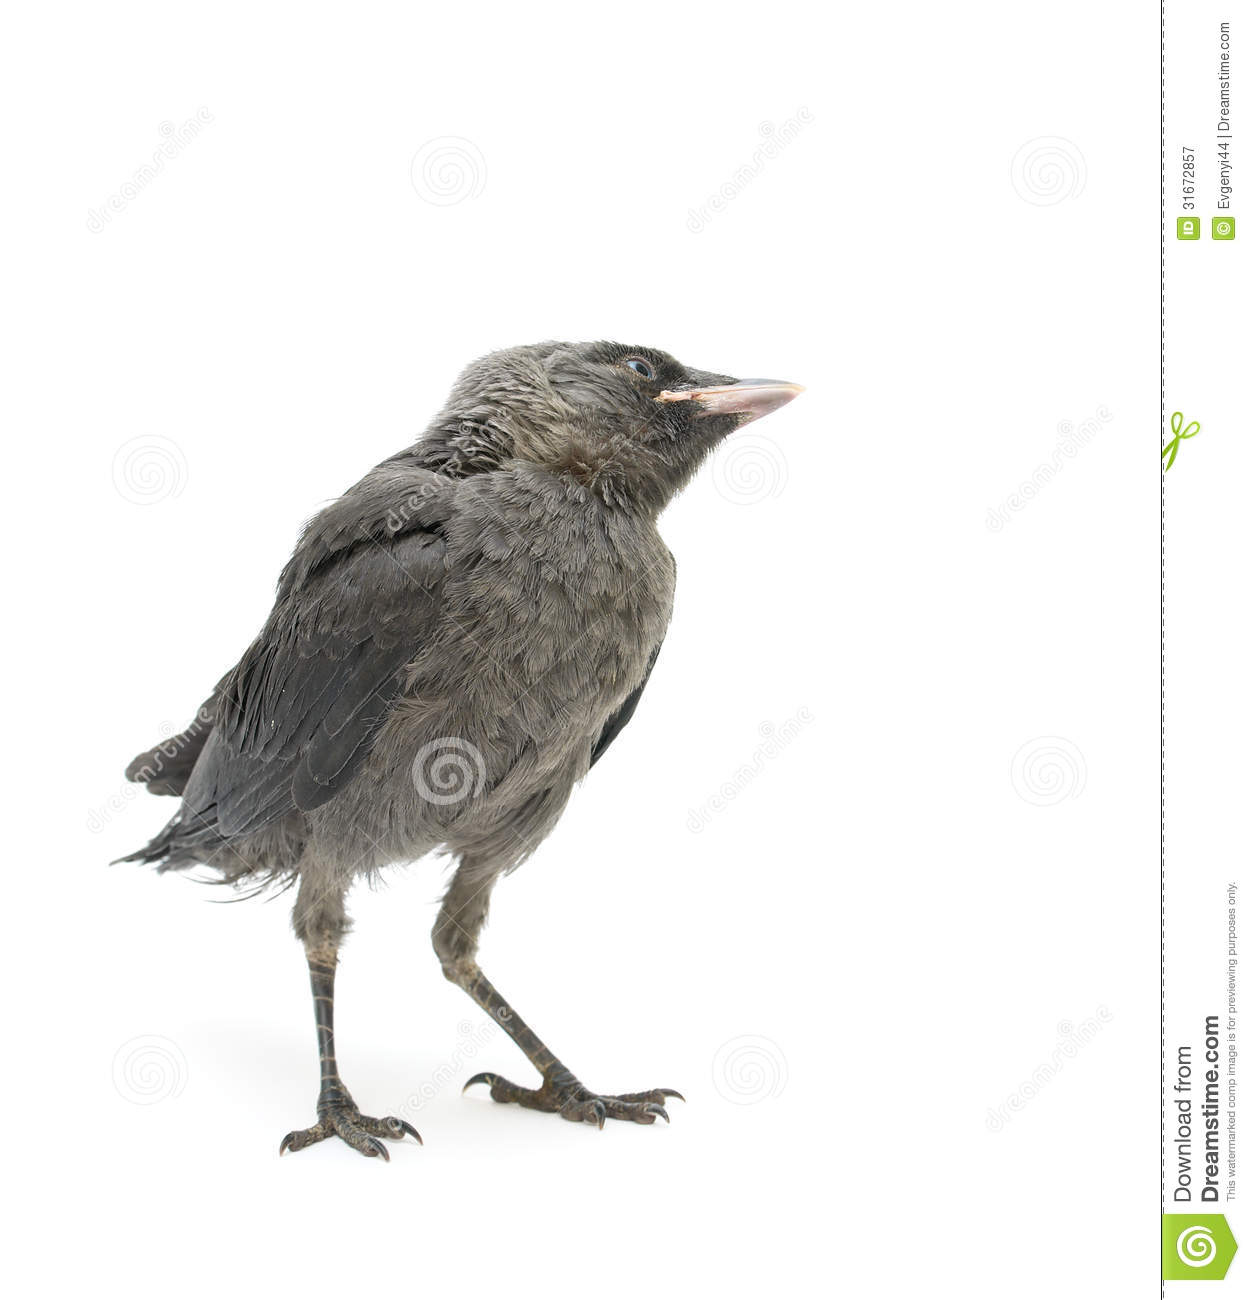 Bird On A White Background  Nestling Crows Bowed His Head And Looks Up